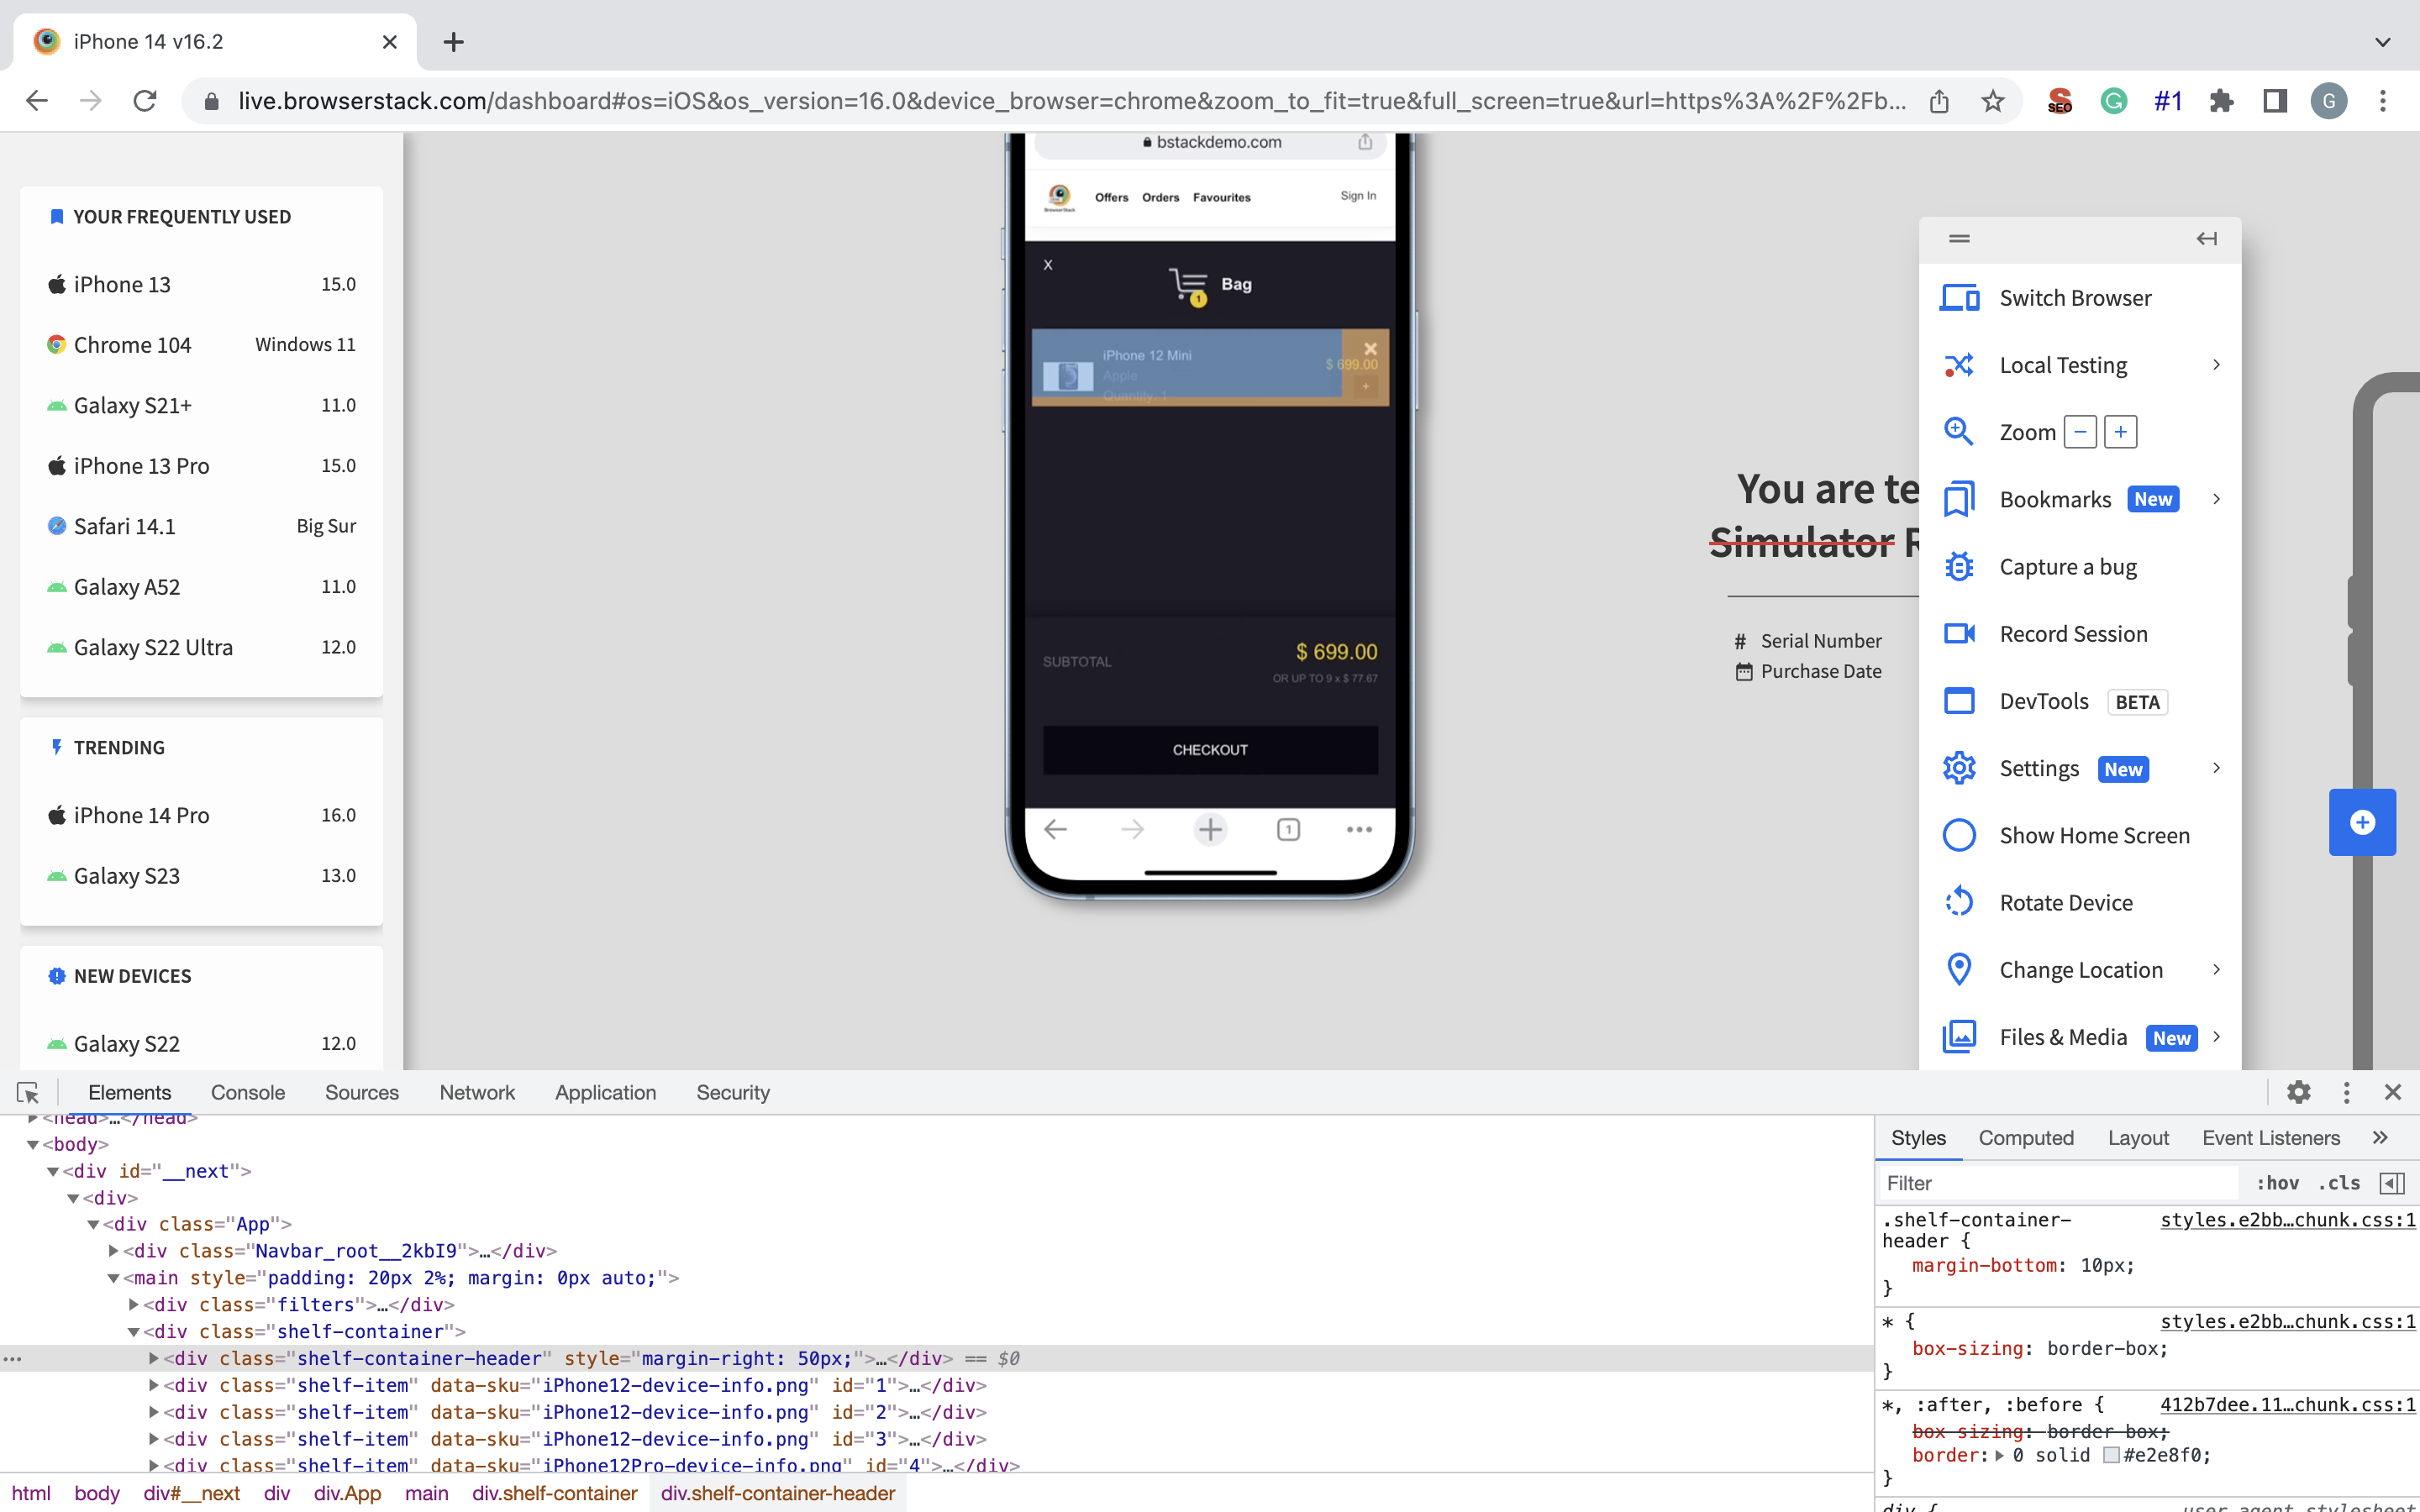 Debug in real time using Inspect Element on iPhone using BrowserStack Live